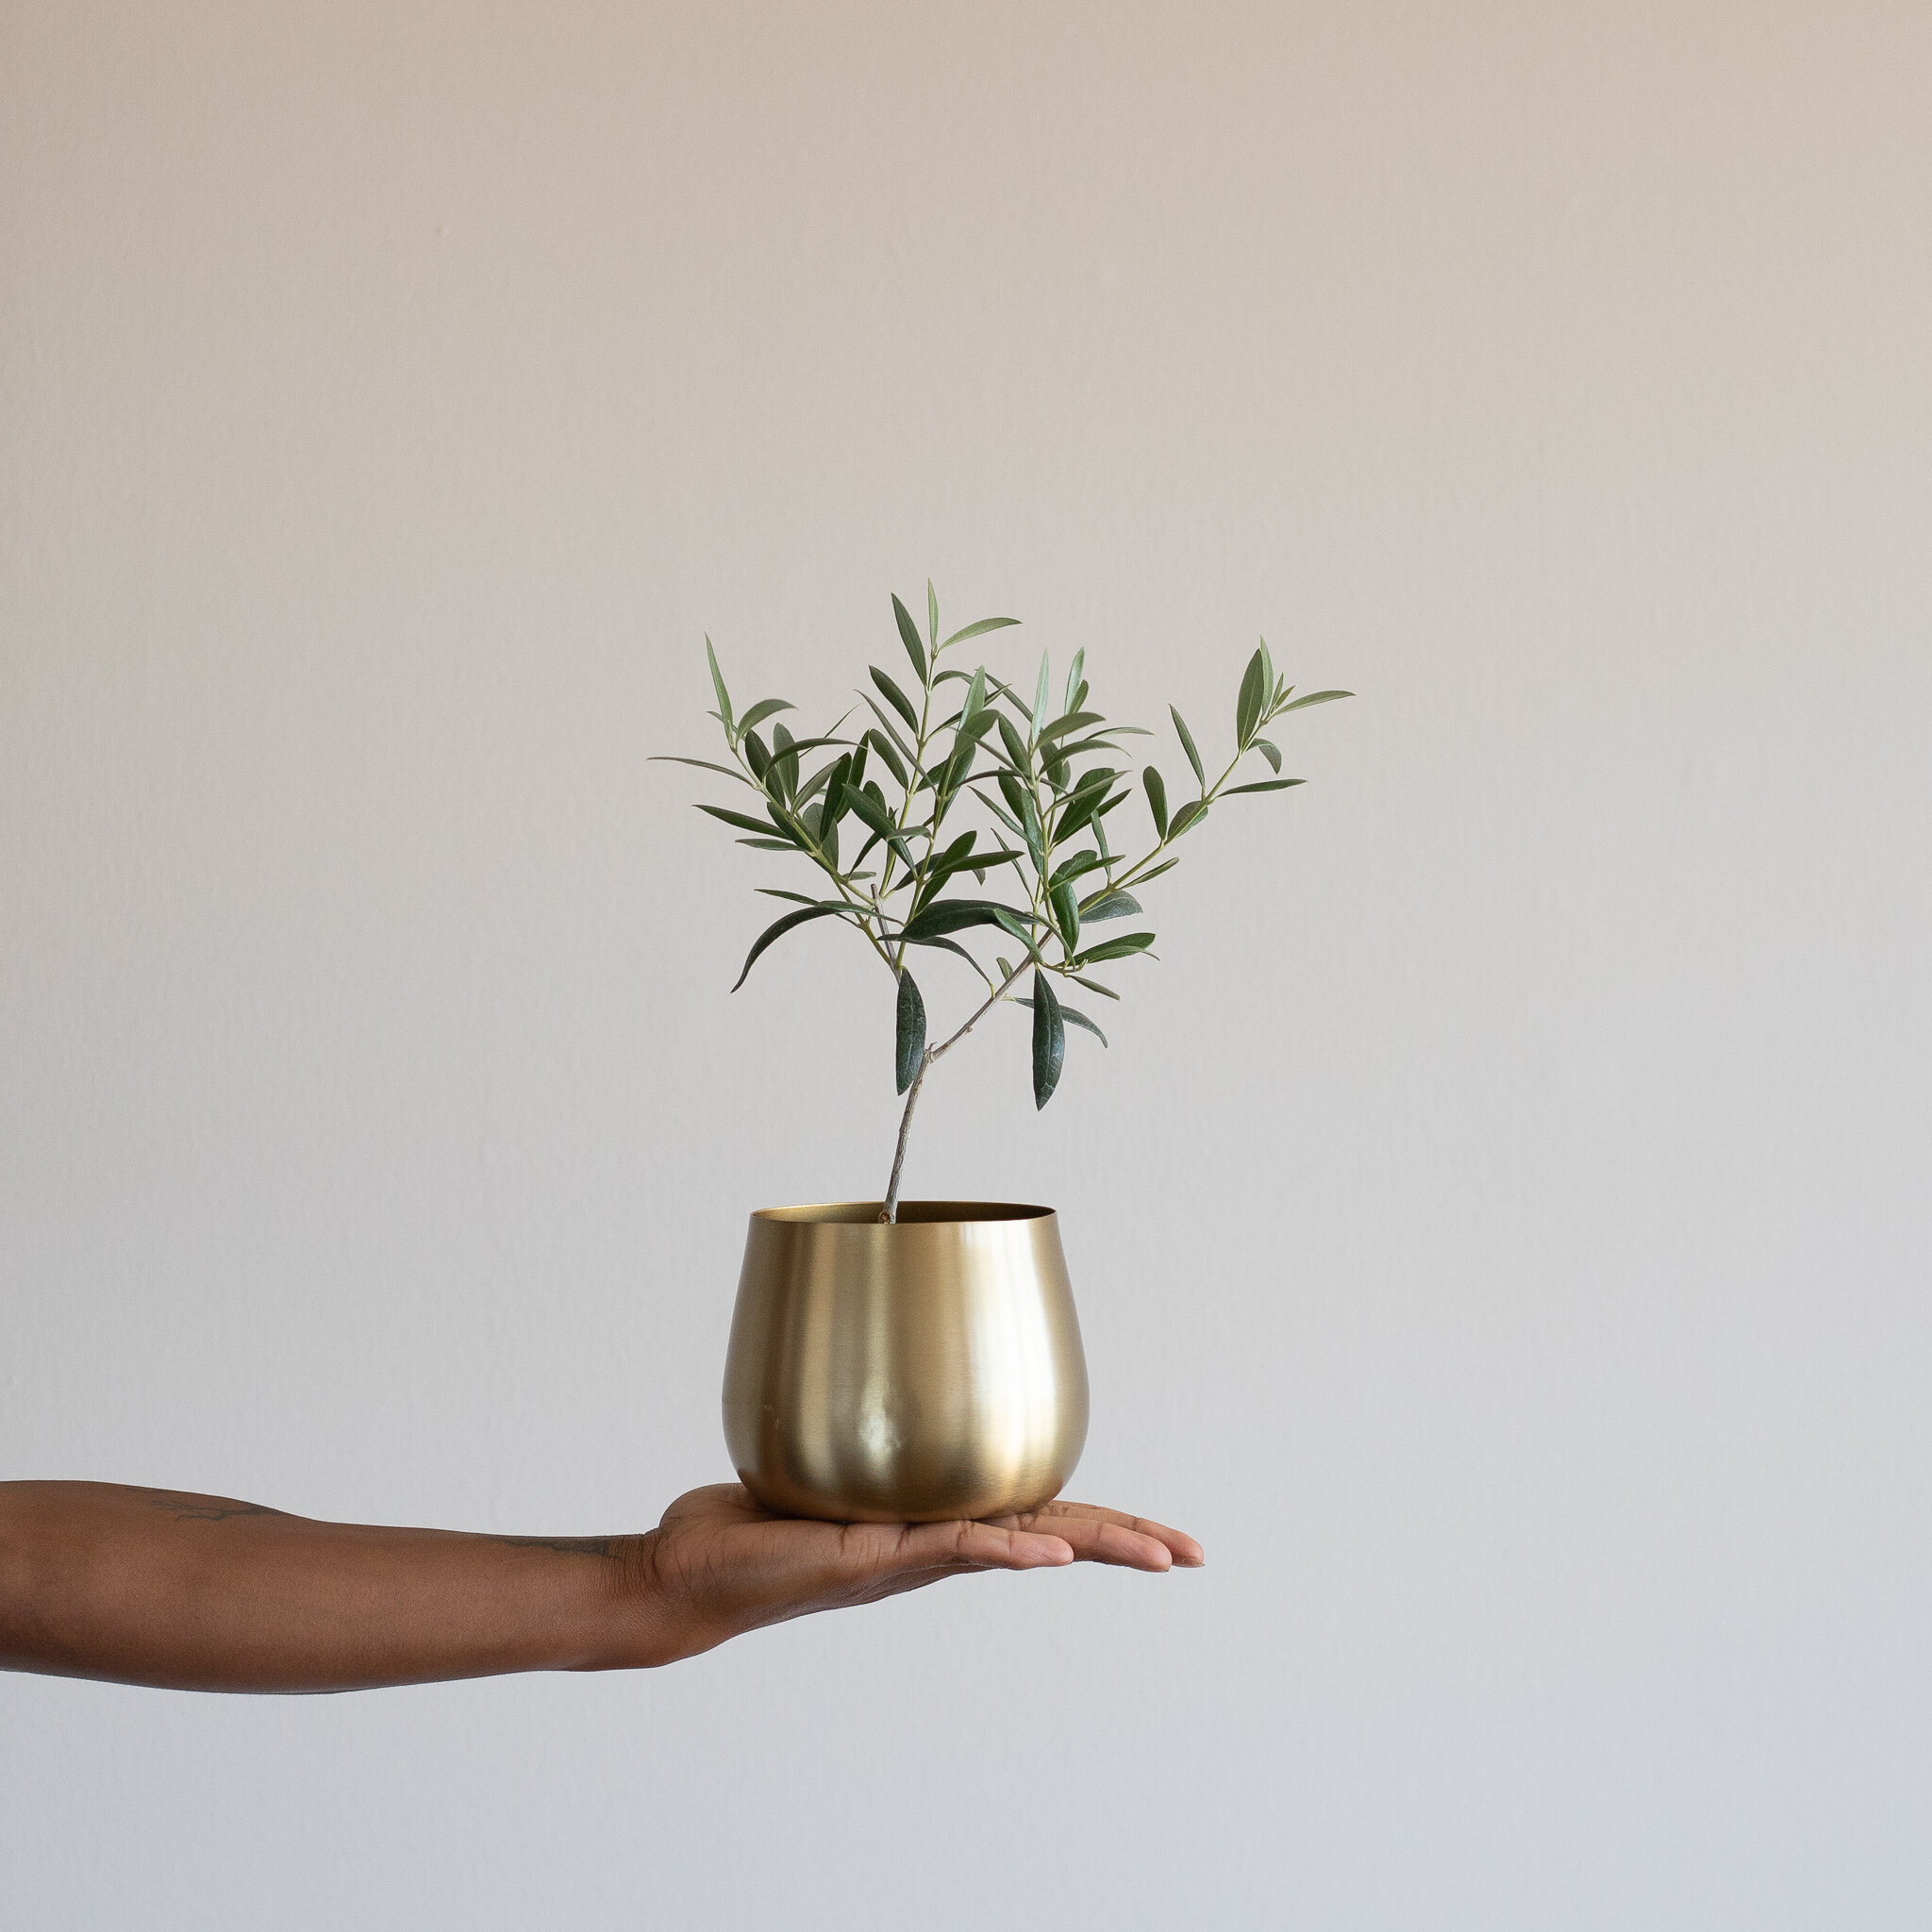 An Olive Tree plant in a gold pot being held up by one hand